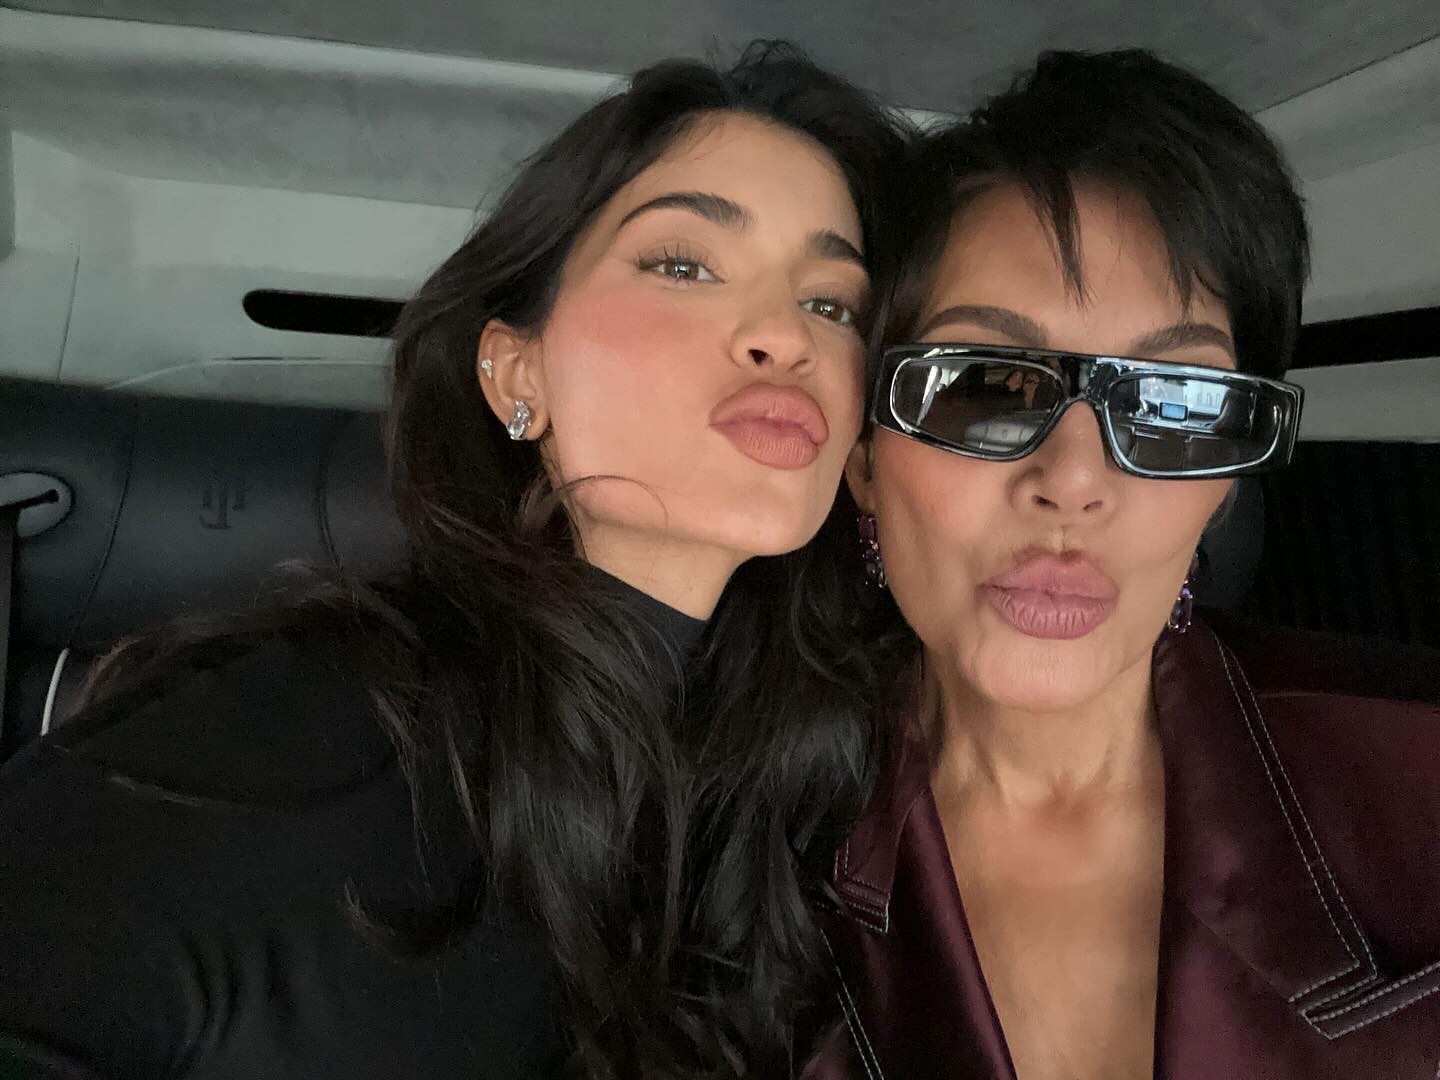 Kylie and Kris pouted their lips as they posed together for a selfie